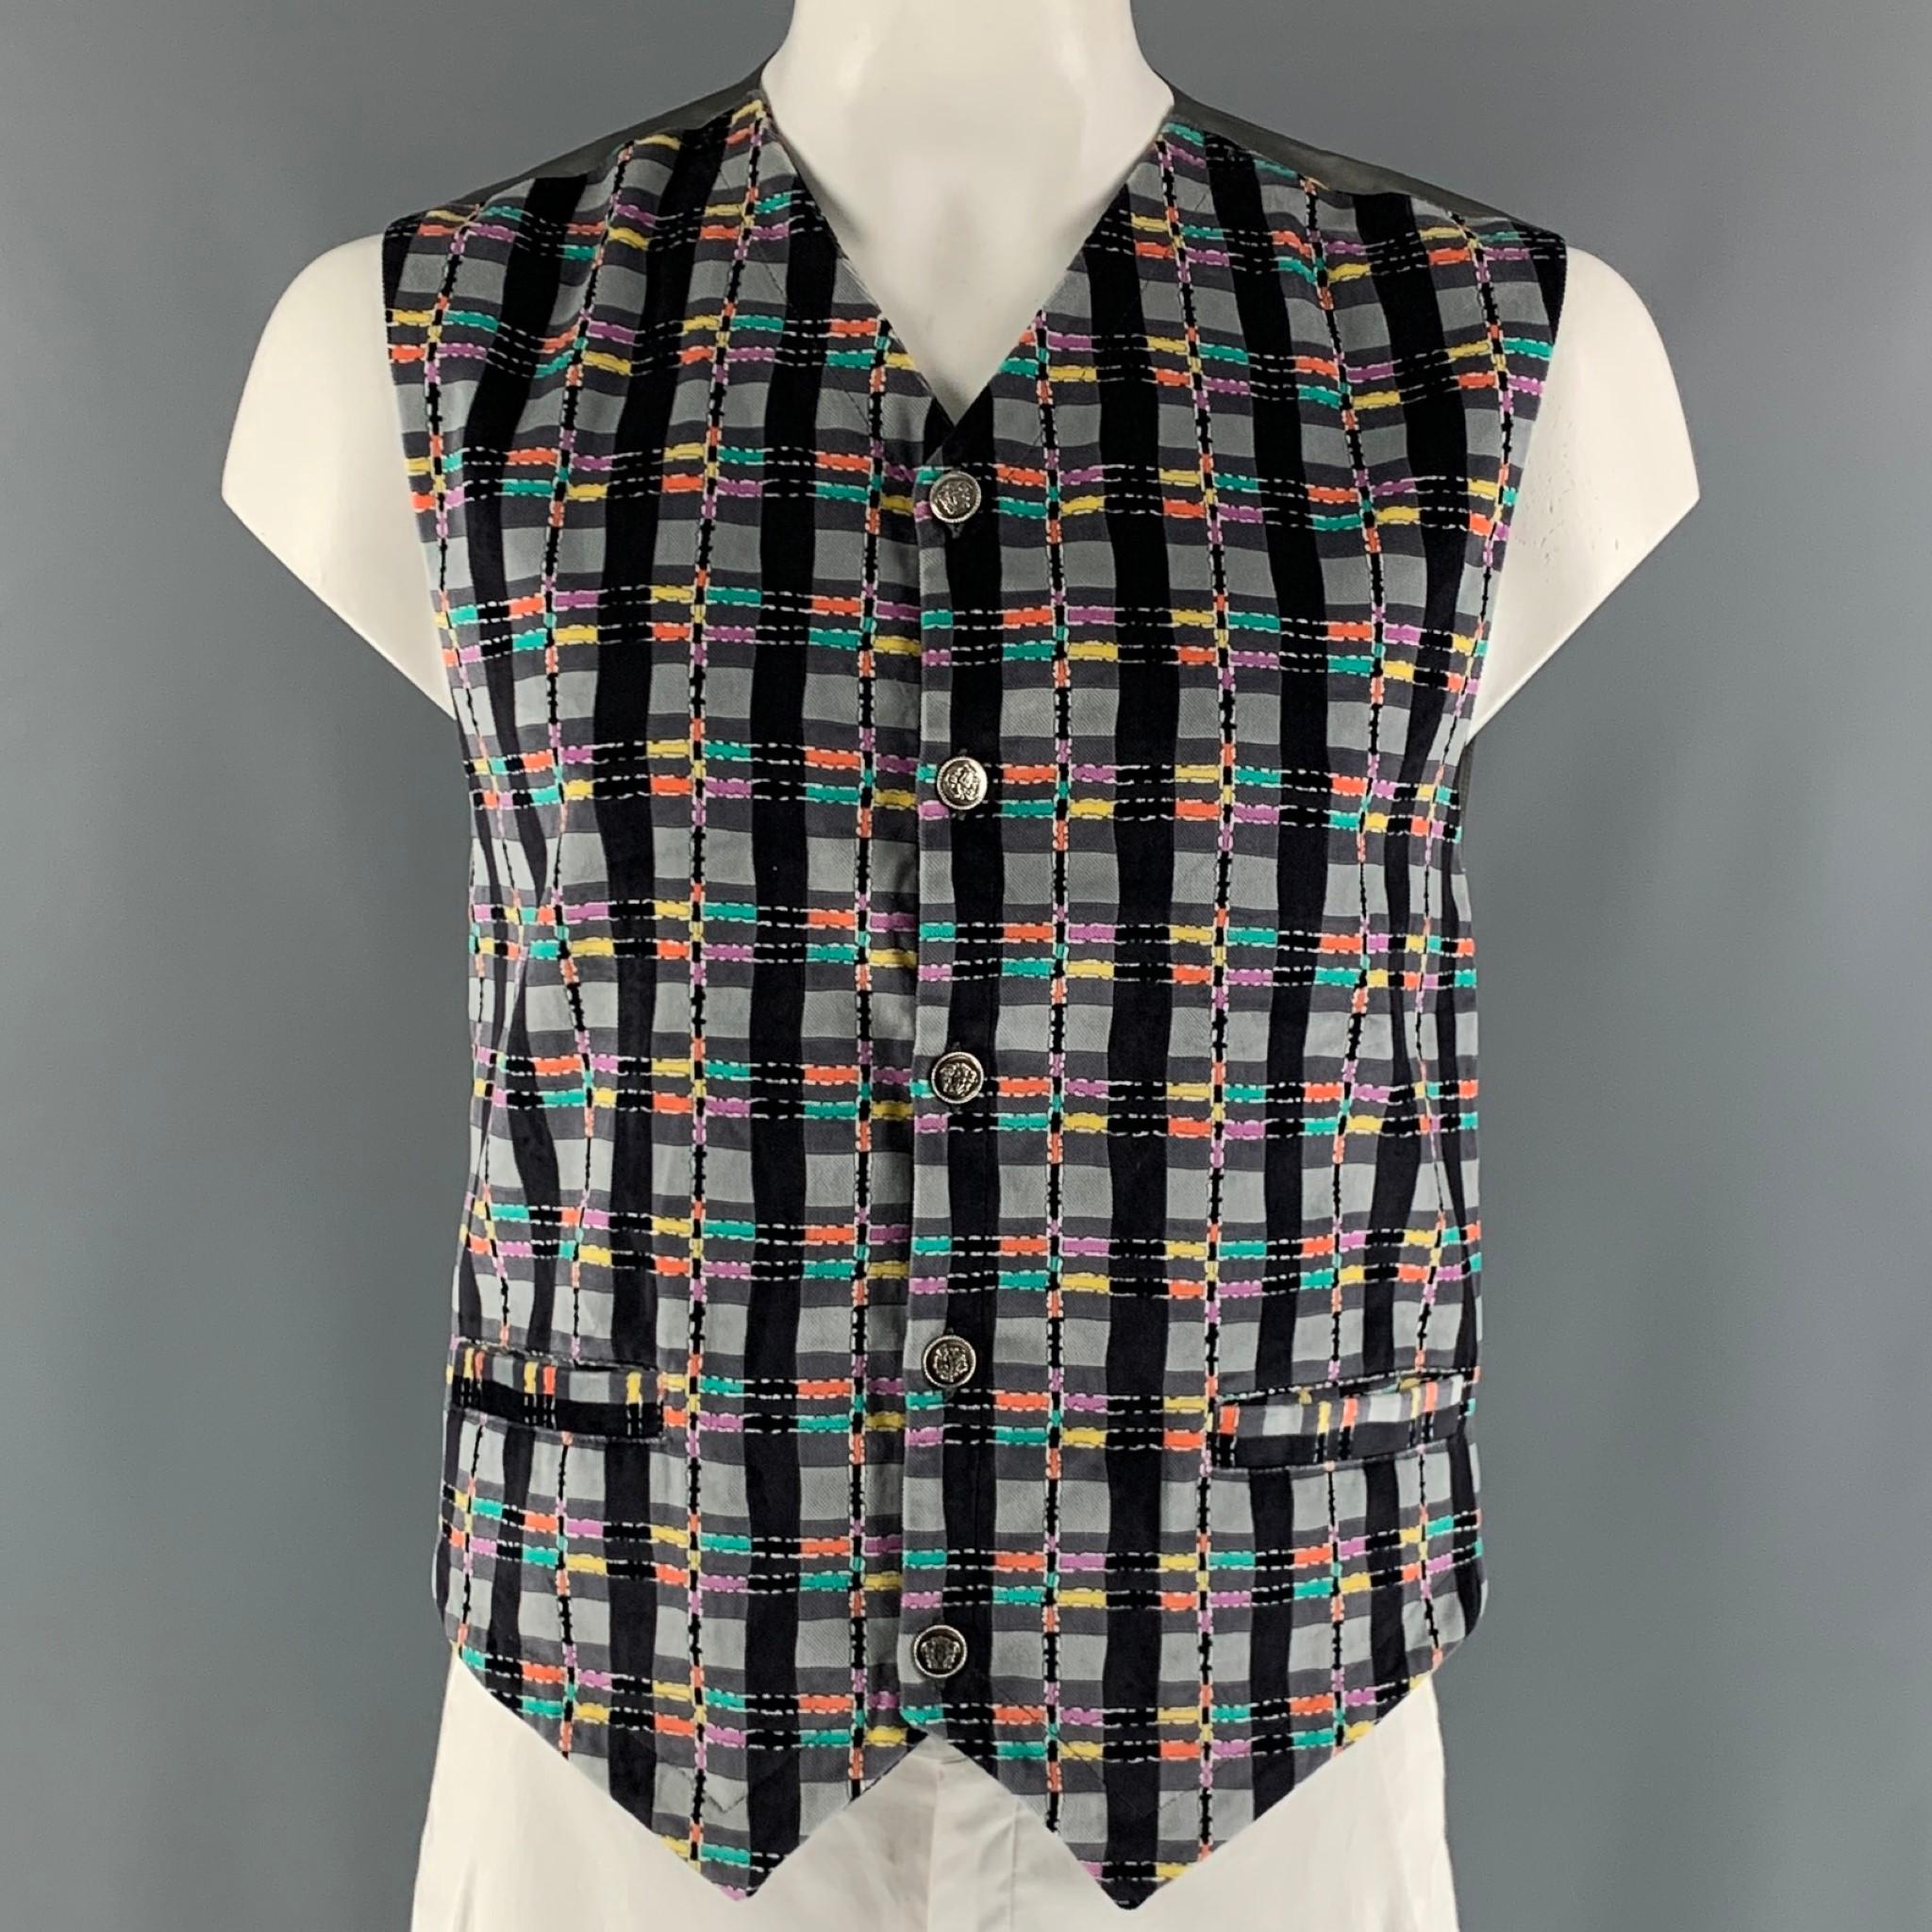 VERSACE JEANS COUTURE vest comes in a grey, black and multi-colour checkered cotton woven material featuring slit pockets, silver medusa buttons, and a buttoned closure. Made in Italy.

Very Good Pre-Owned Condition.
Marked: